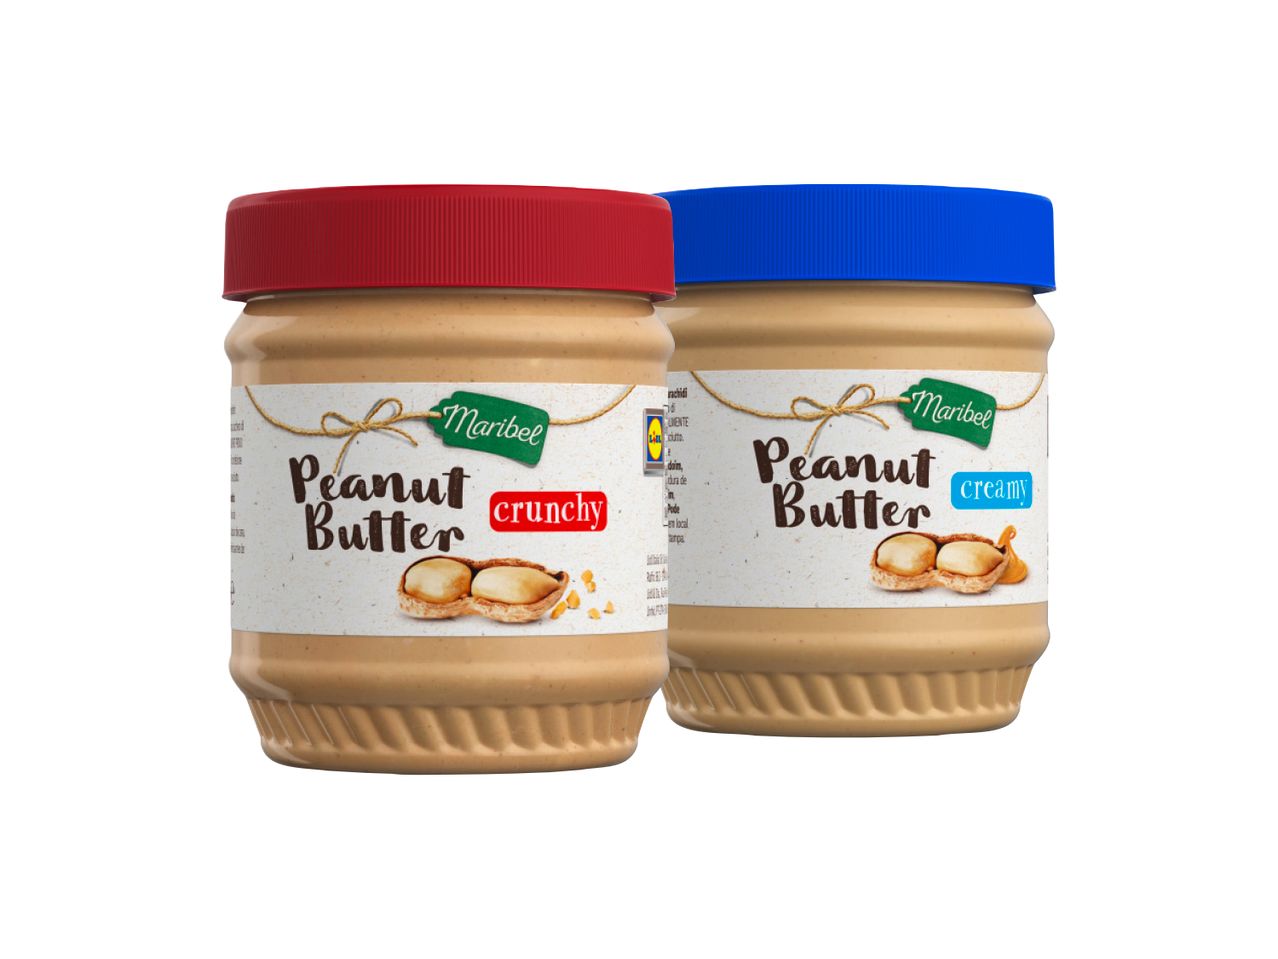 Go to full screen view: Peanut Butter - Image 1